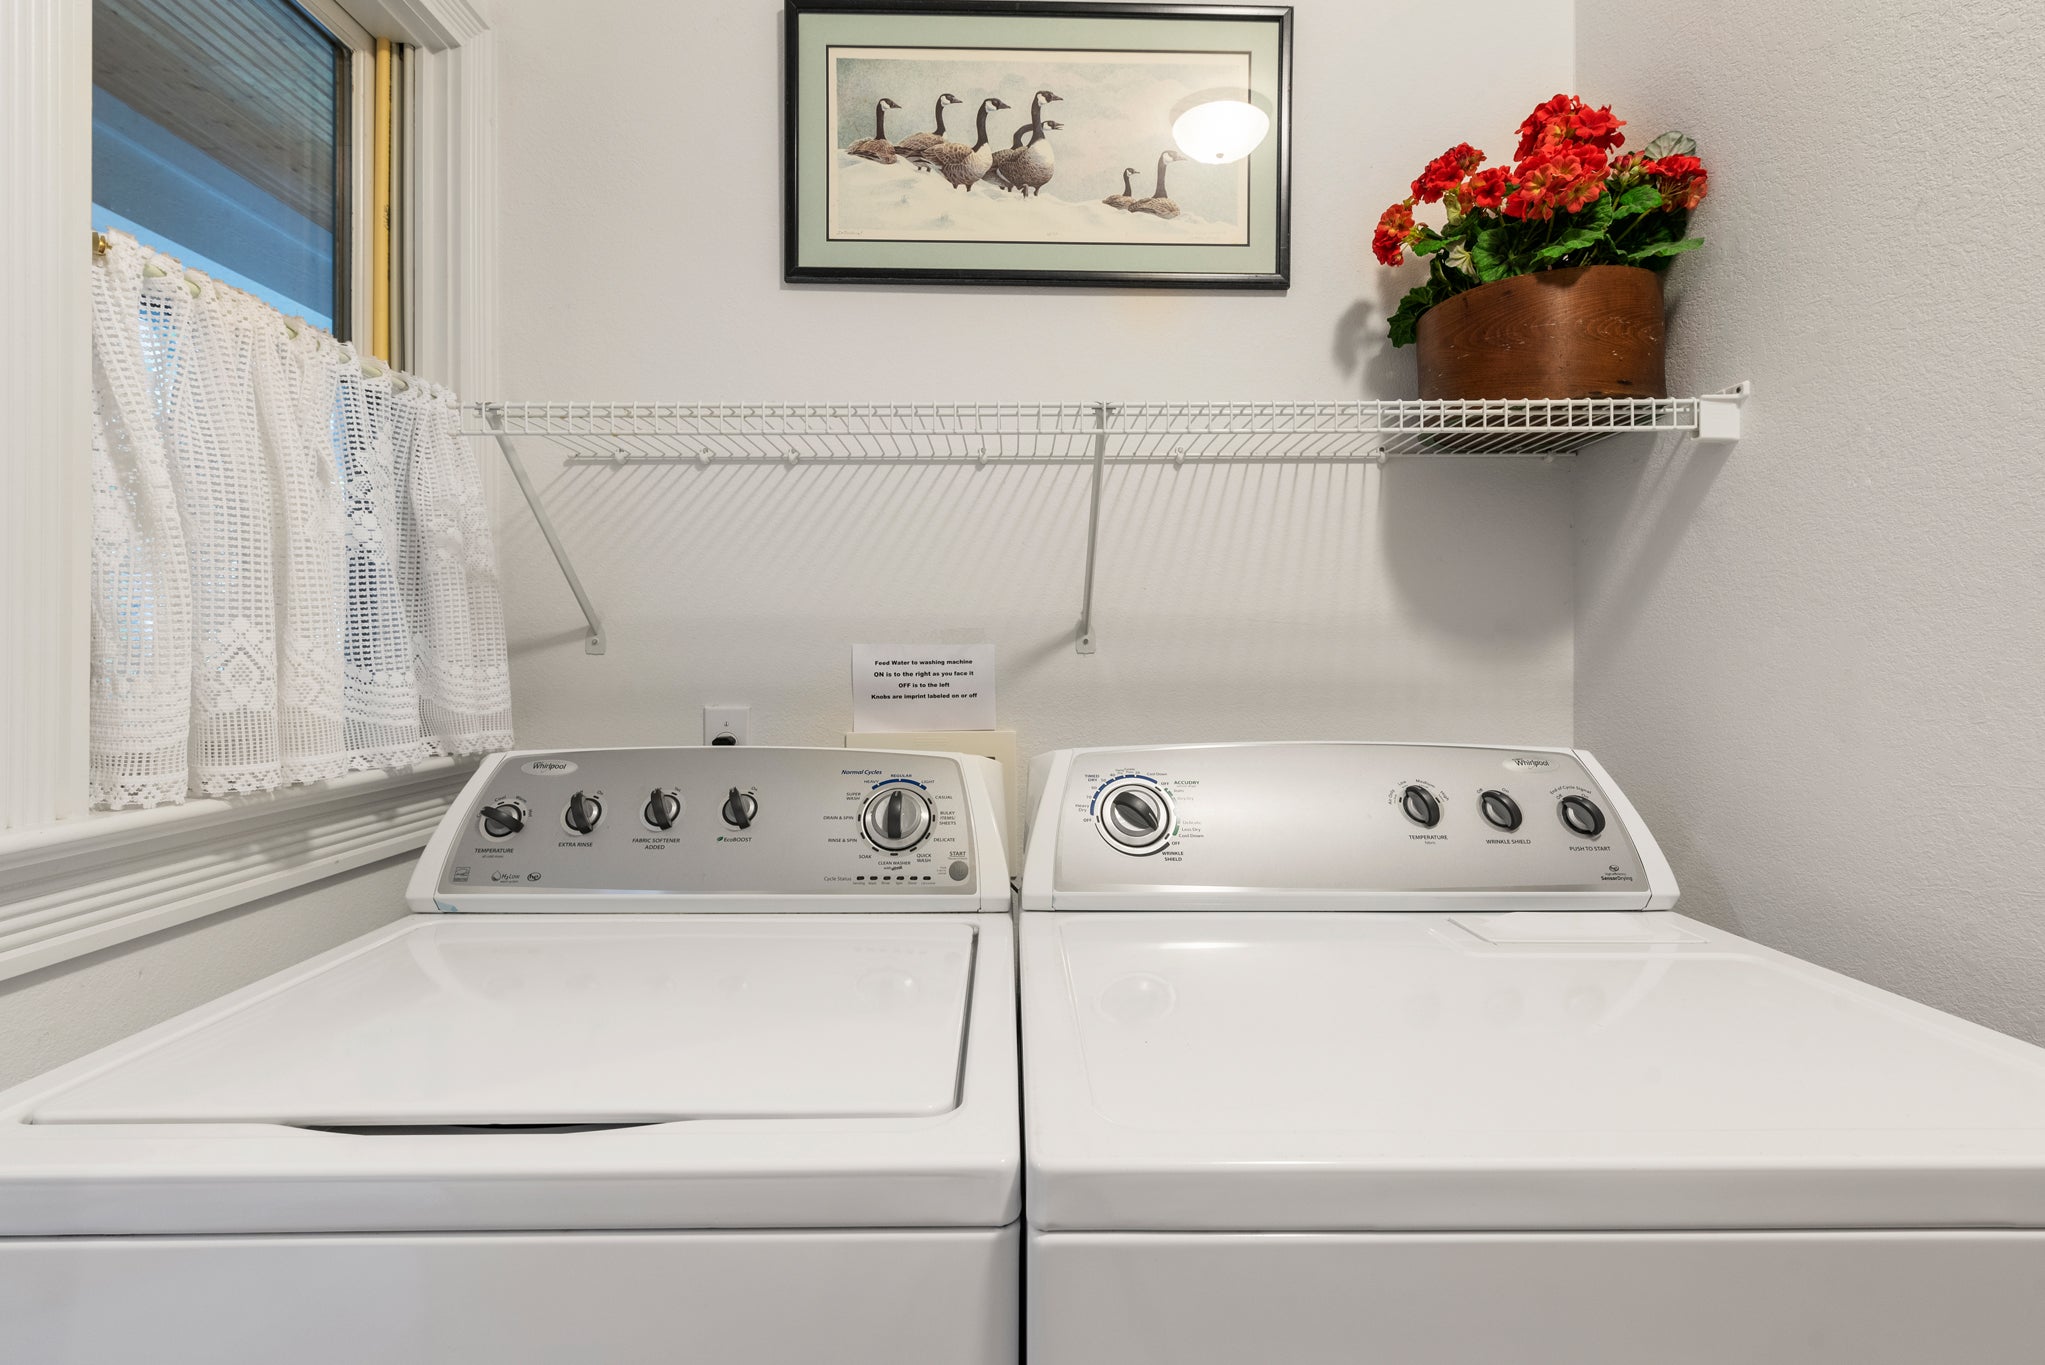 CC177: Picture This | Bottom Level Laundry Room